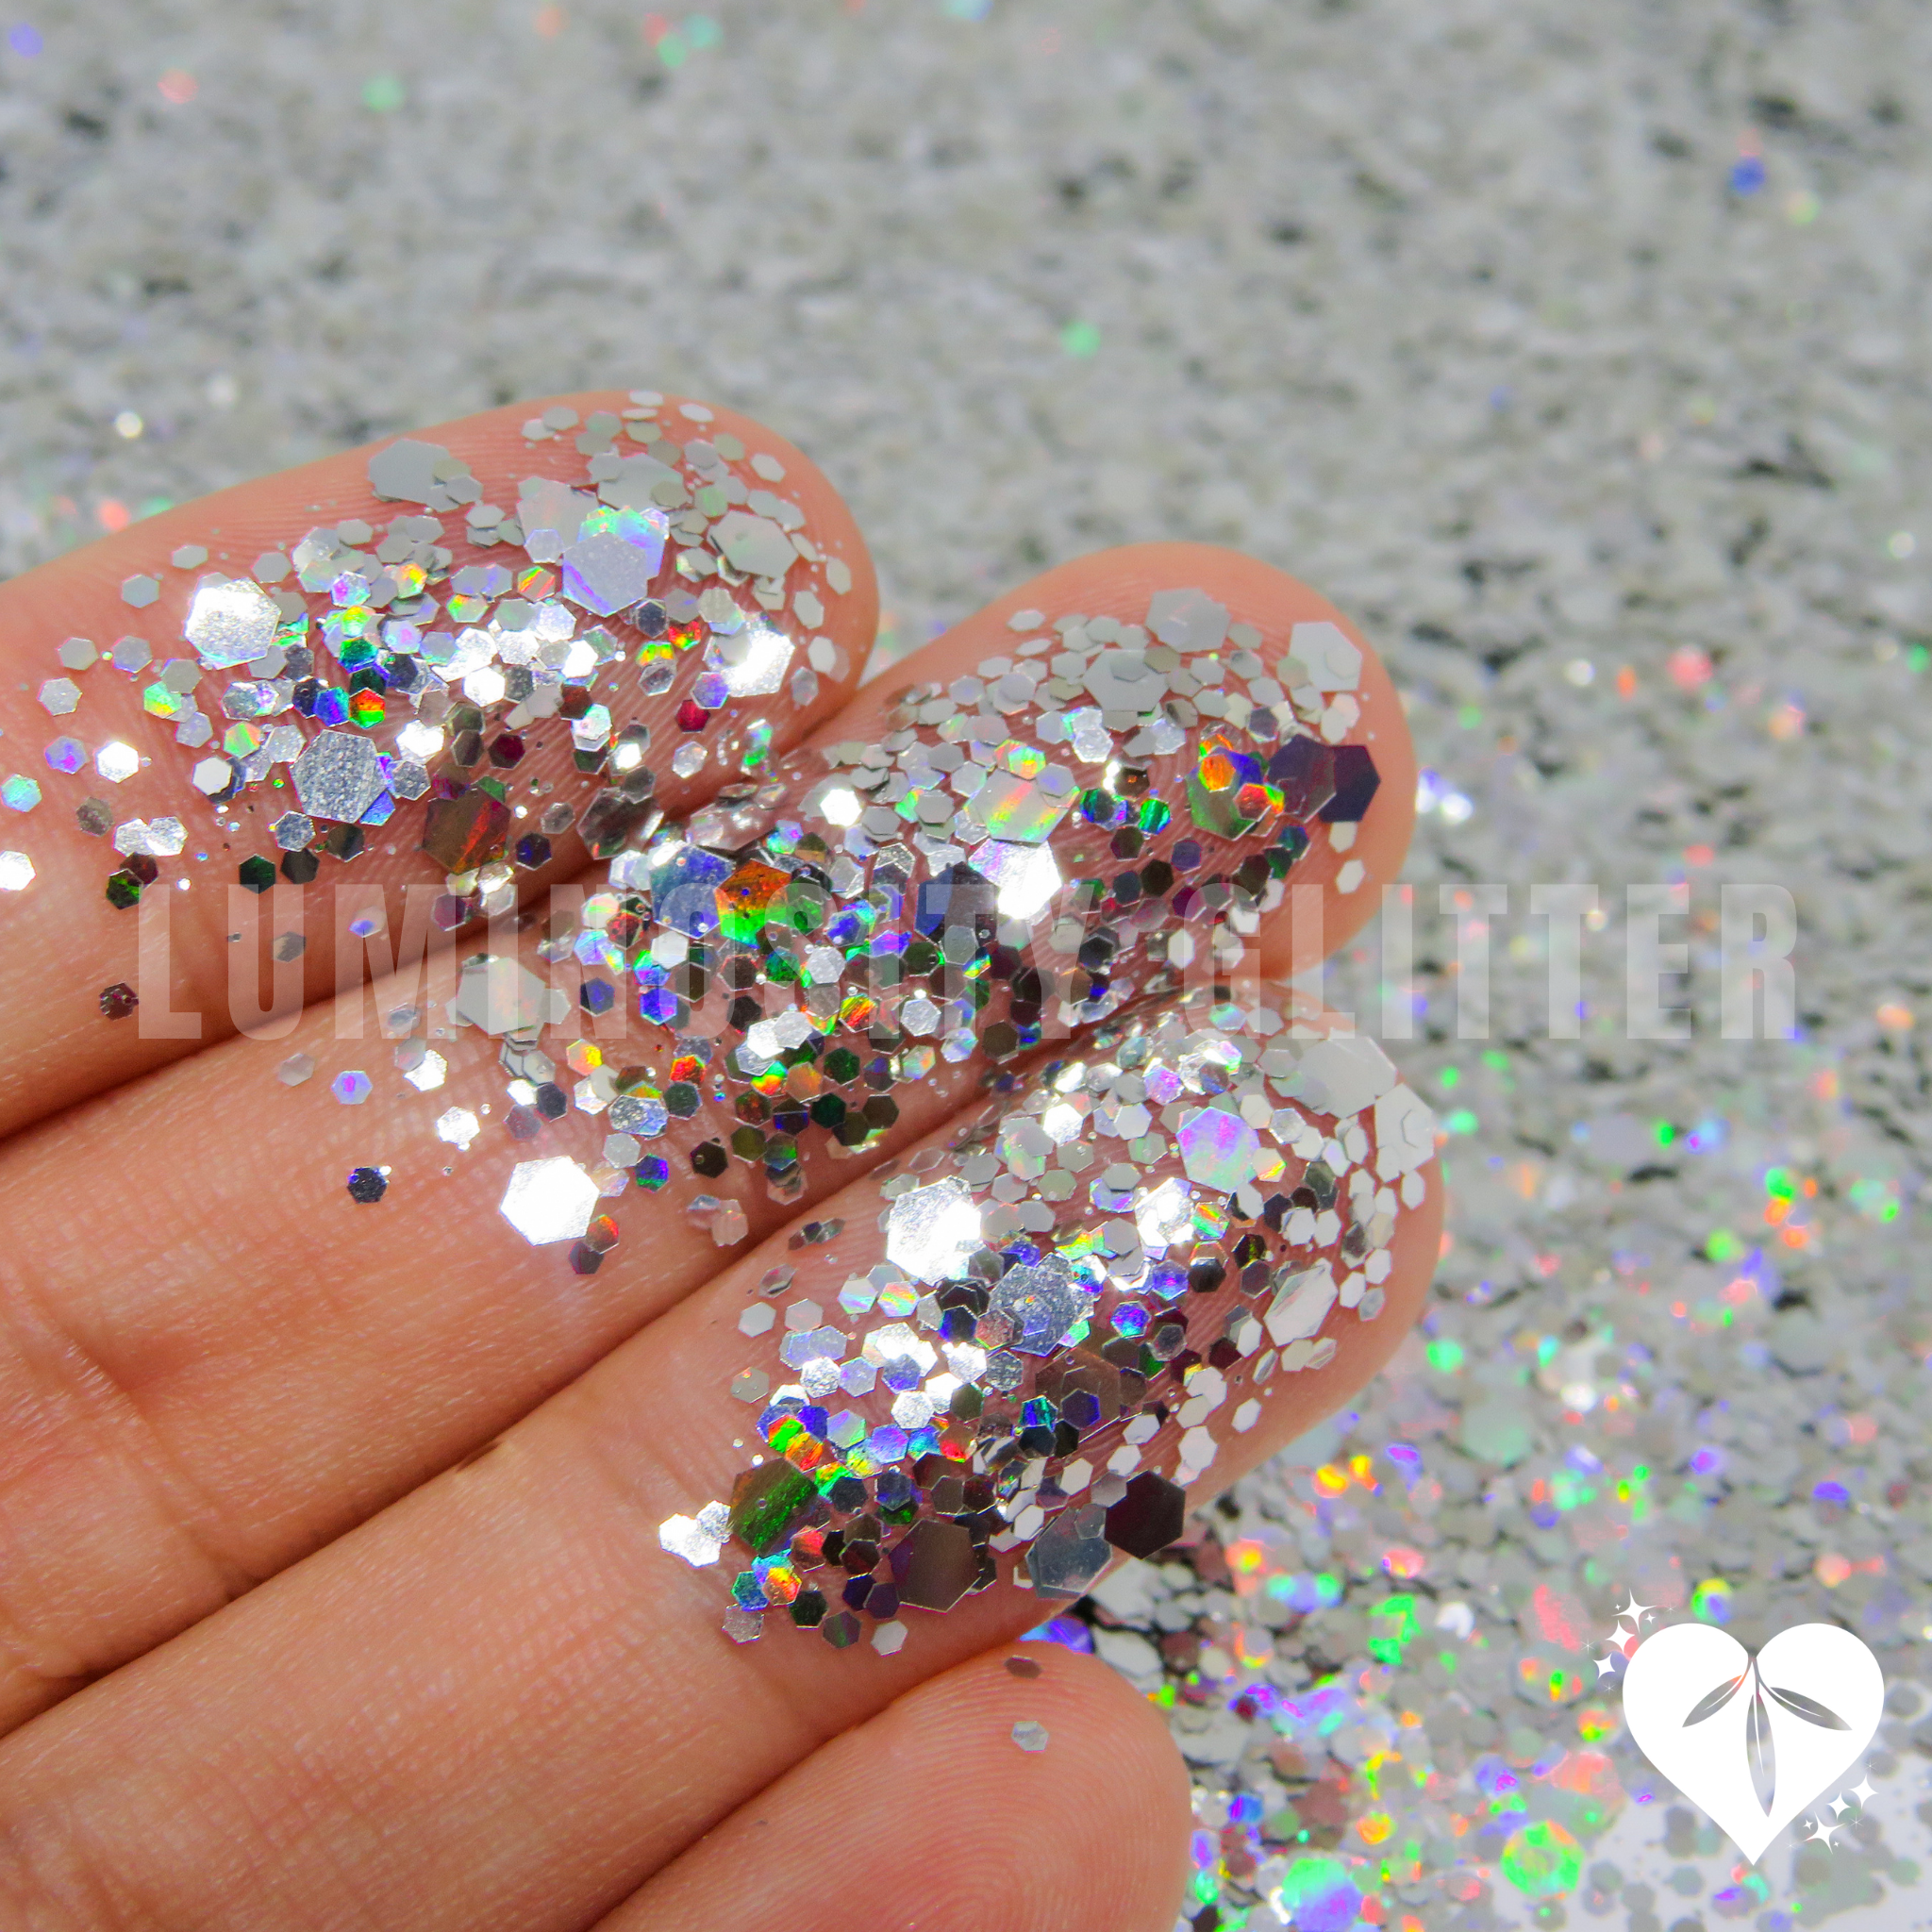 Holographic biodegradable cosmetic glitter mix by Luminosity Glitter